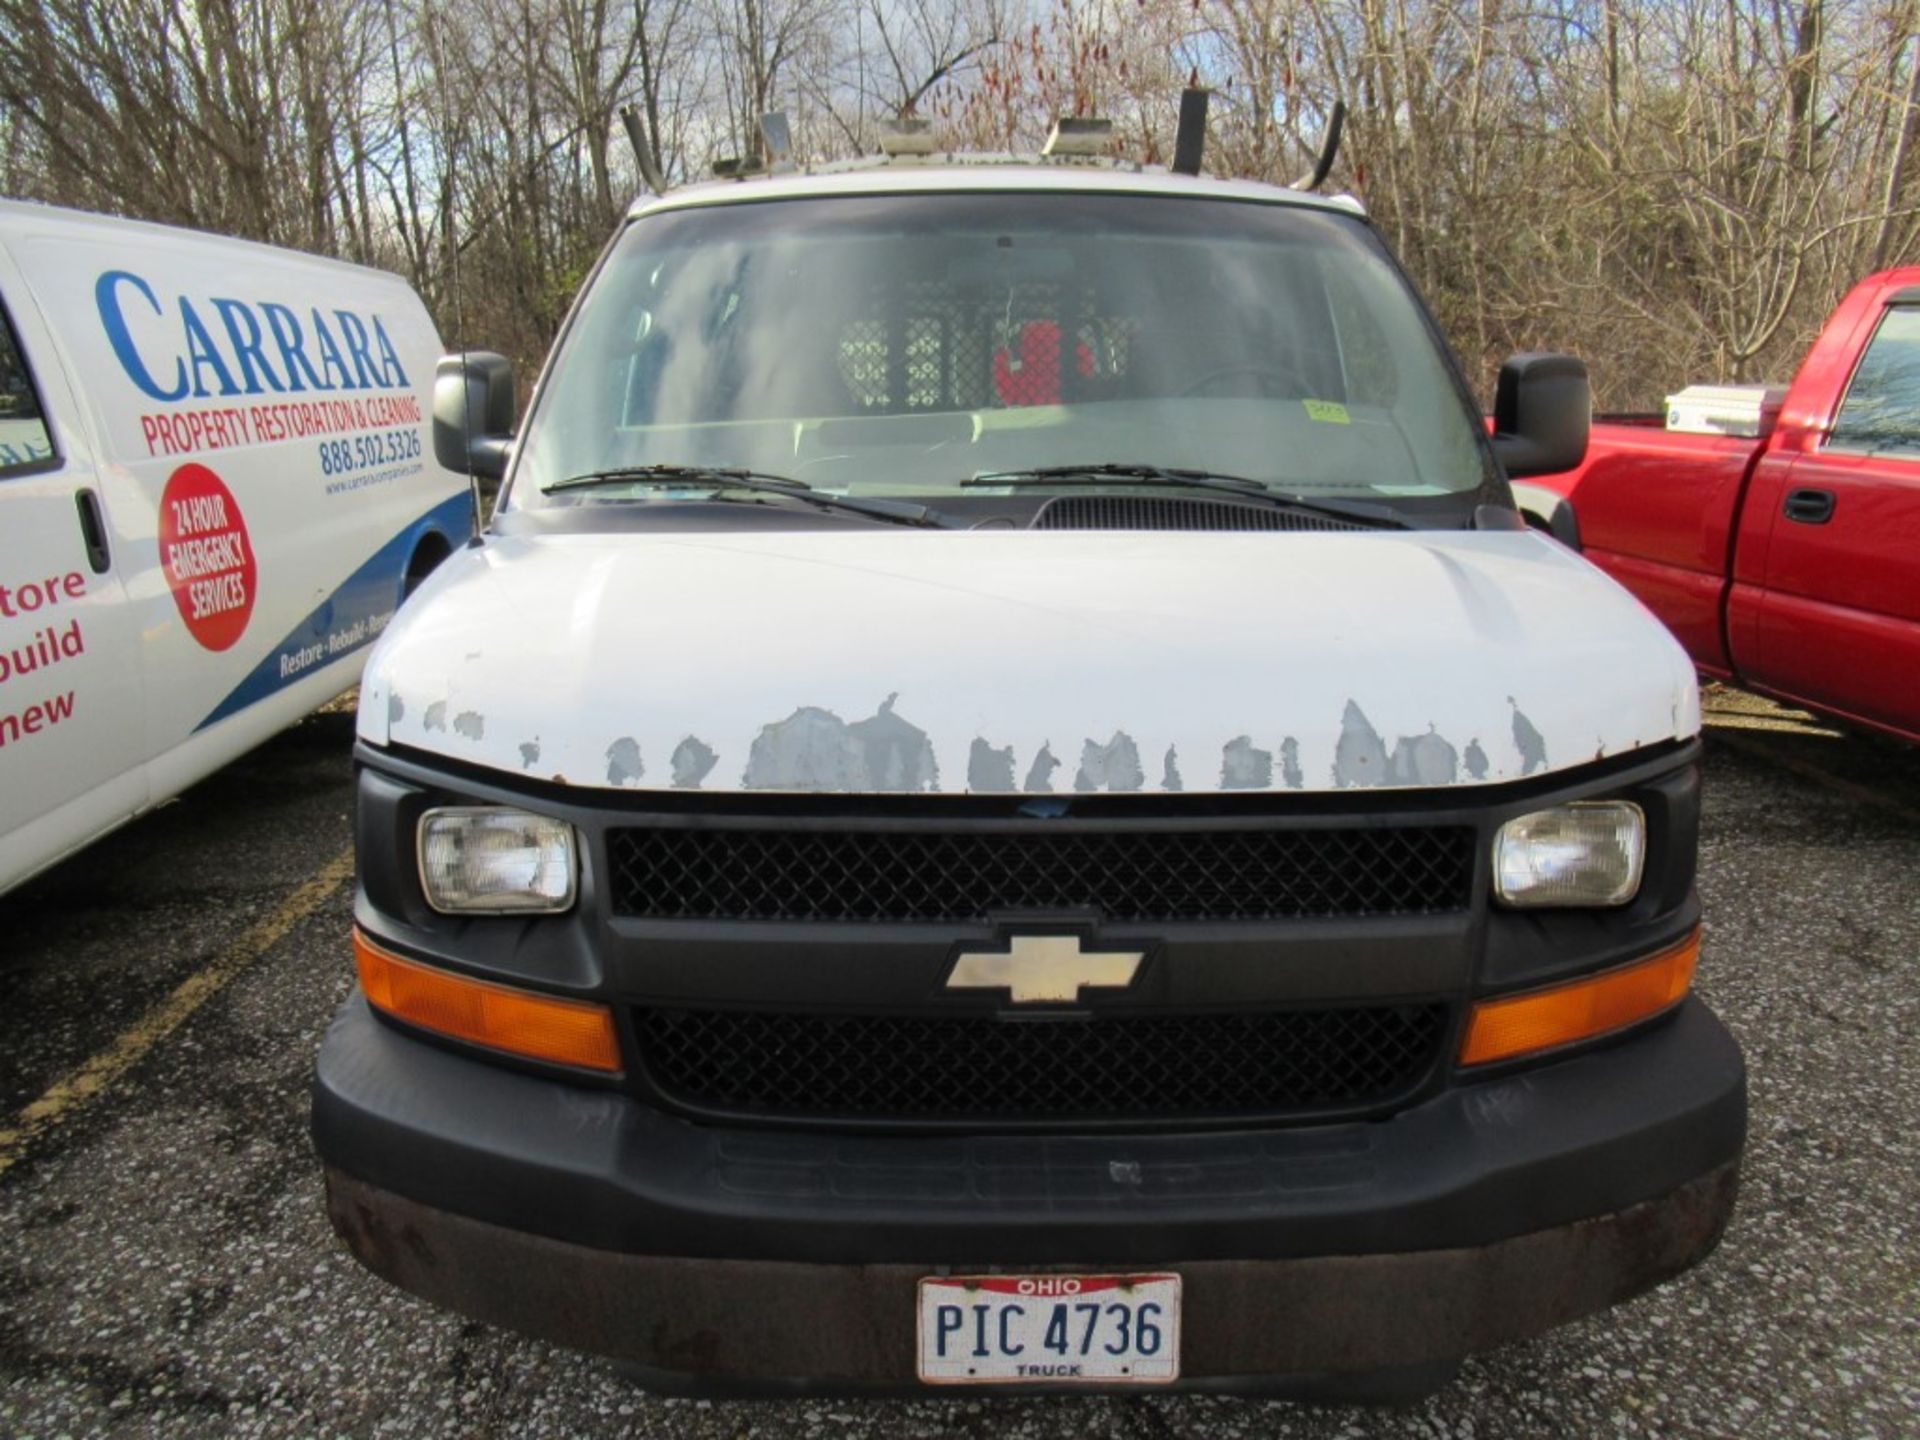 2005 Chevrolet Express Cargo Van, VIN 1GCFG15X651257294, Automatic, AC, AM/FM, Towing, Cracked - Image 3 of 33